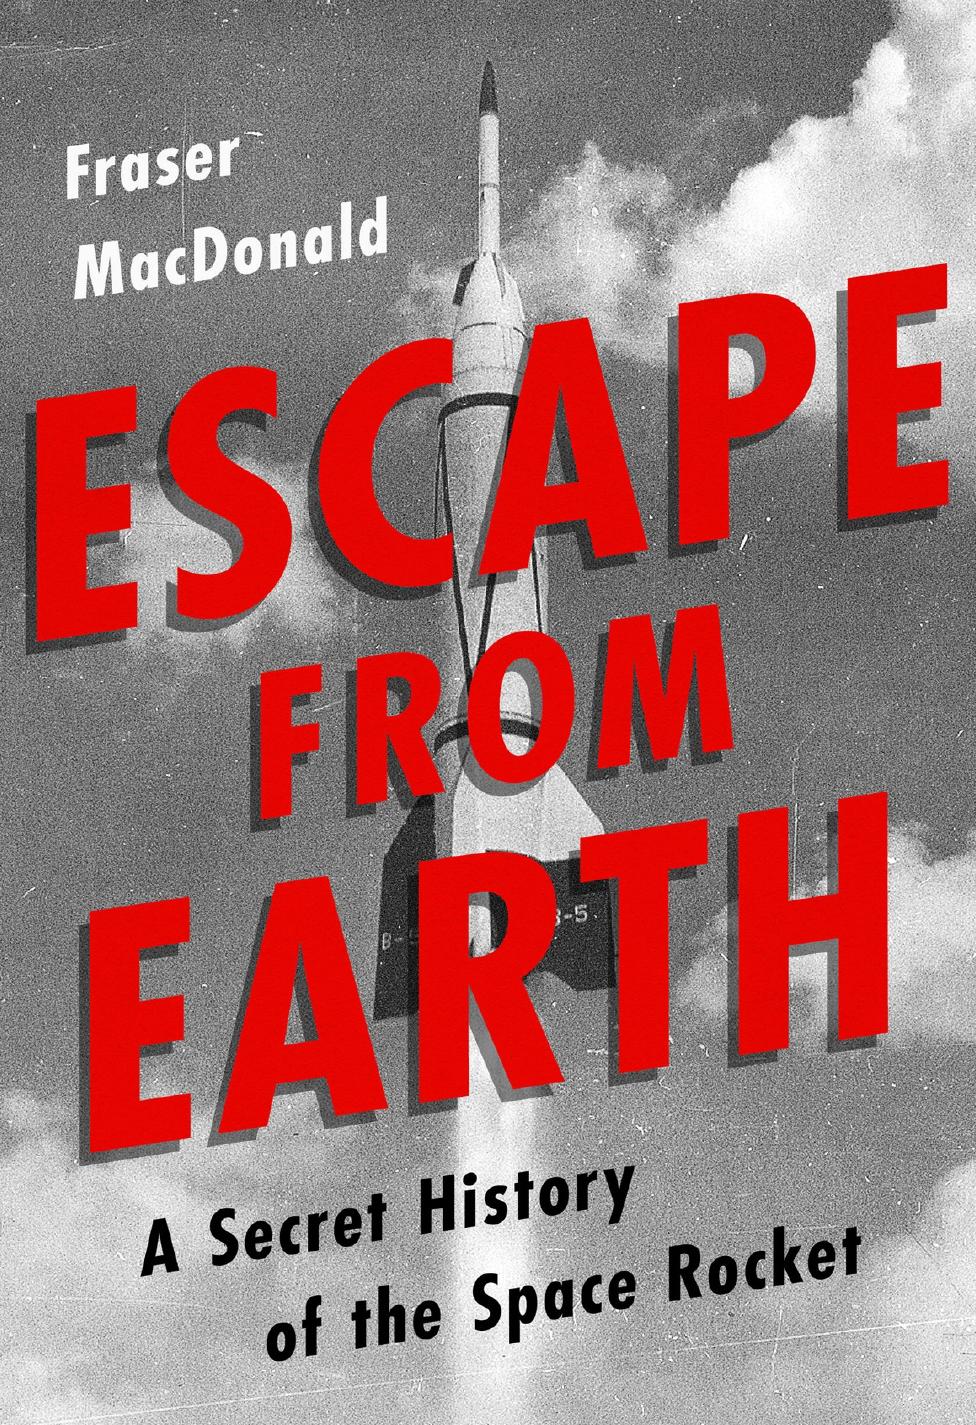 Escape from Earth by Fraser MacDonald